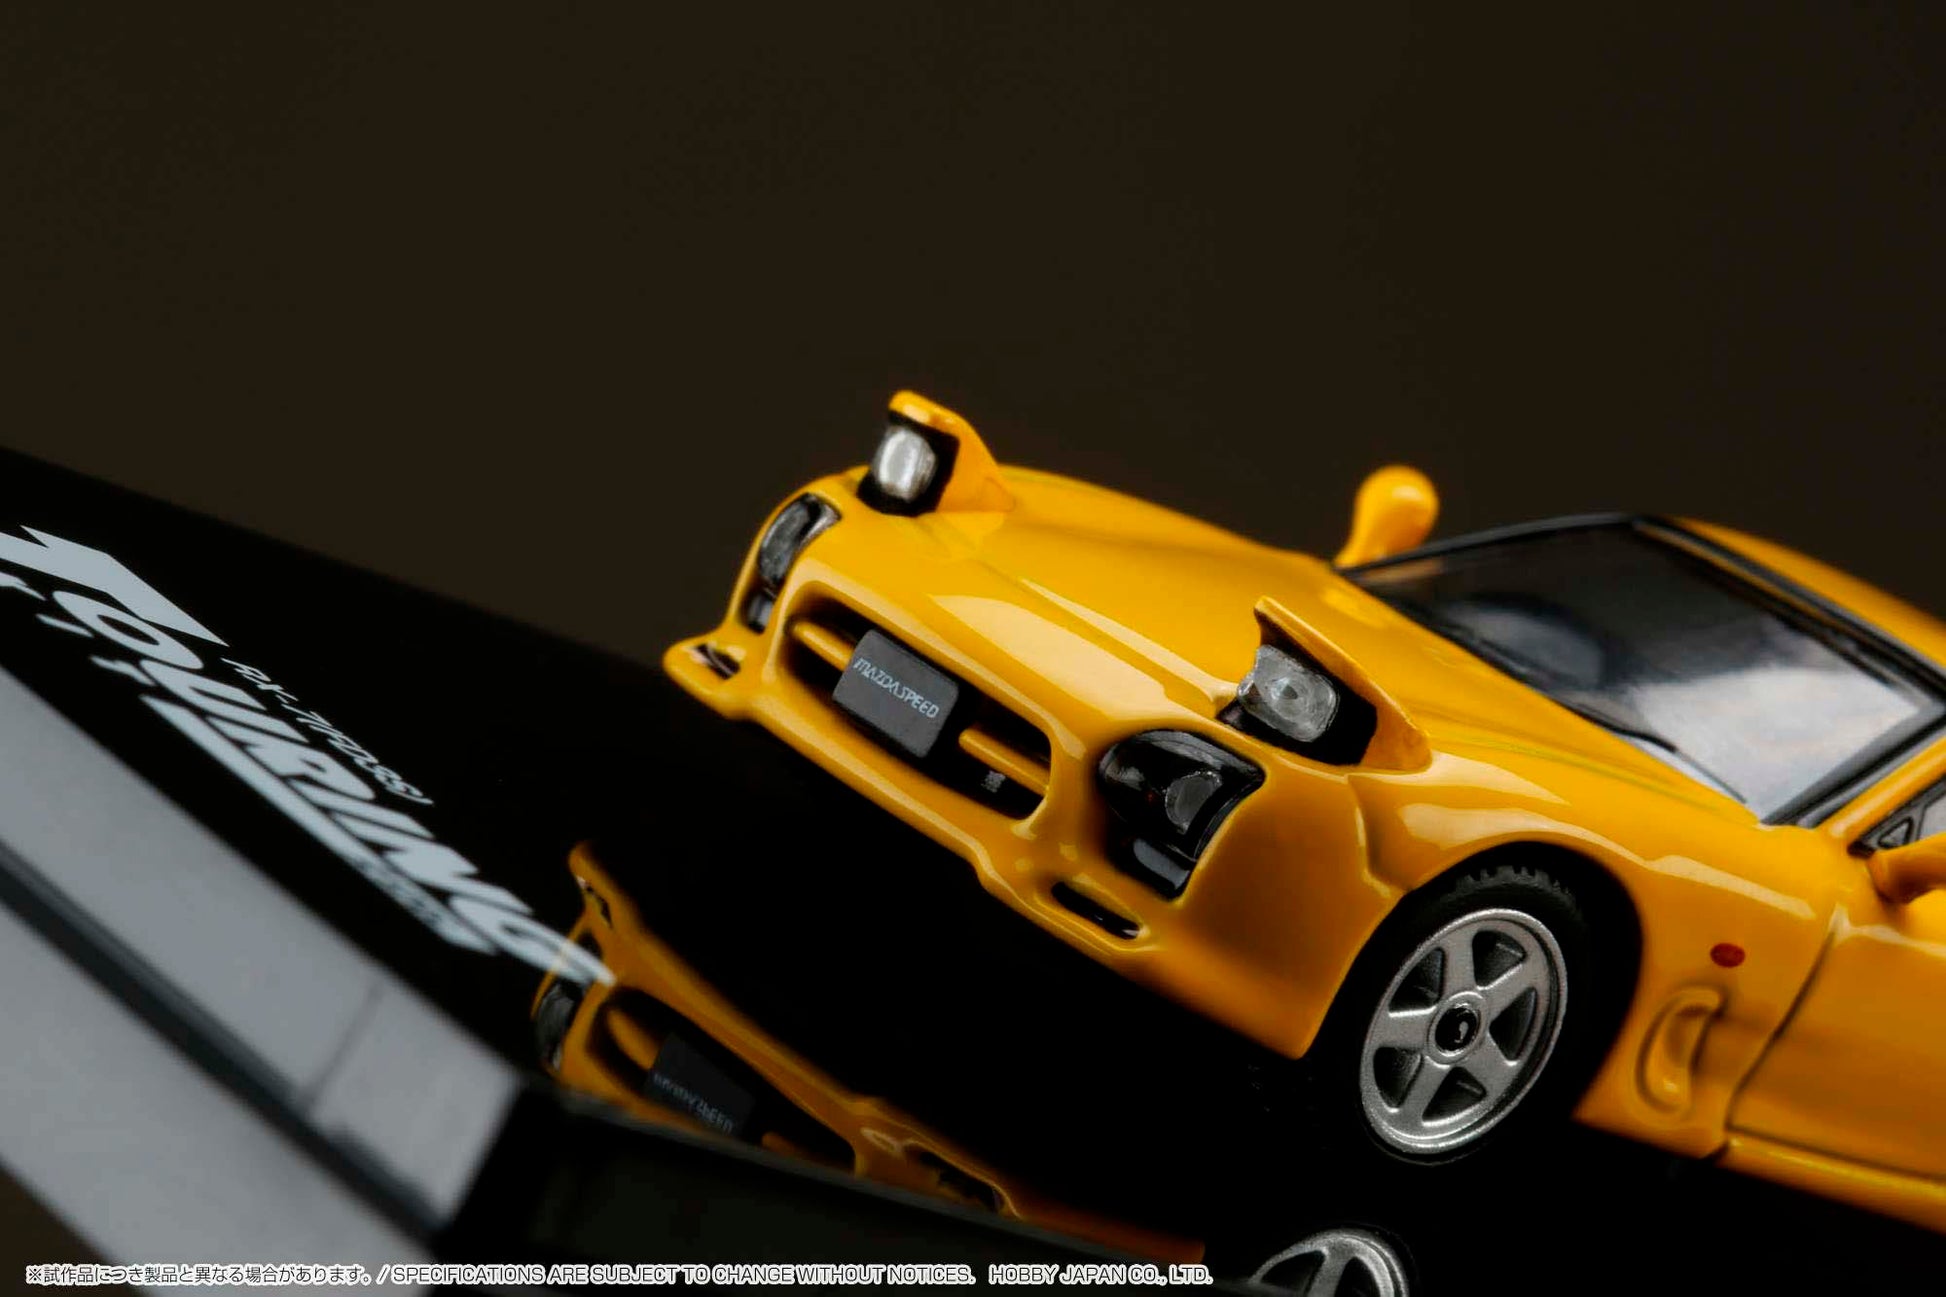 Hobby Japan
1/64 enfini RX-7 FD3S (A-Spec.) Yellow Hobby Japan